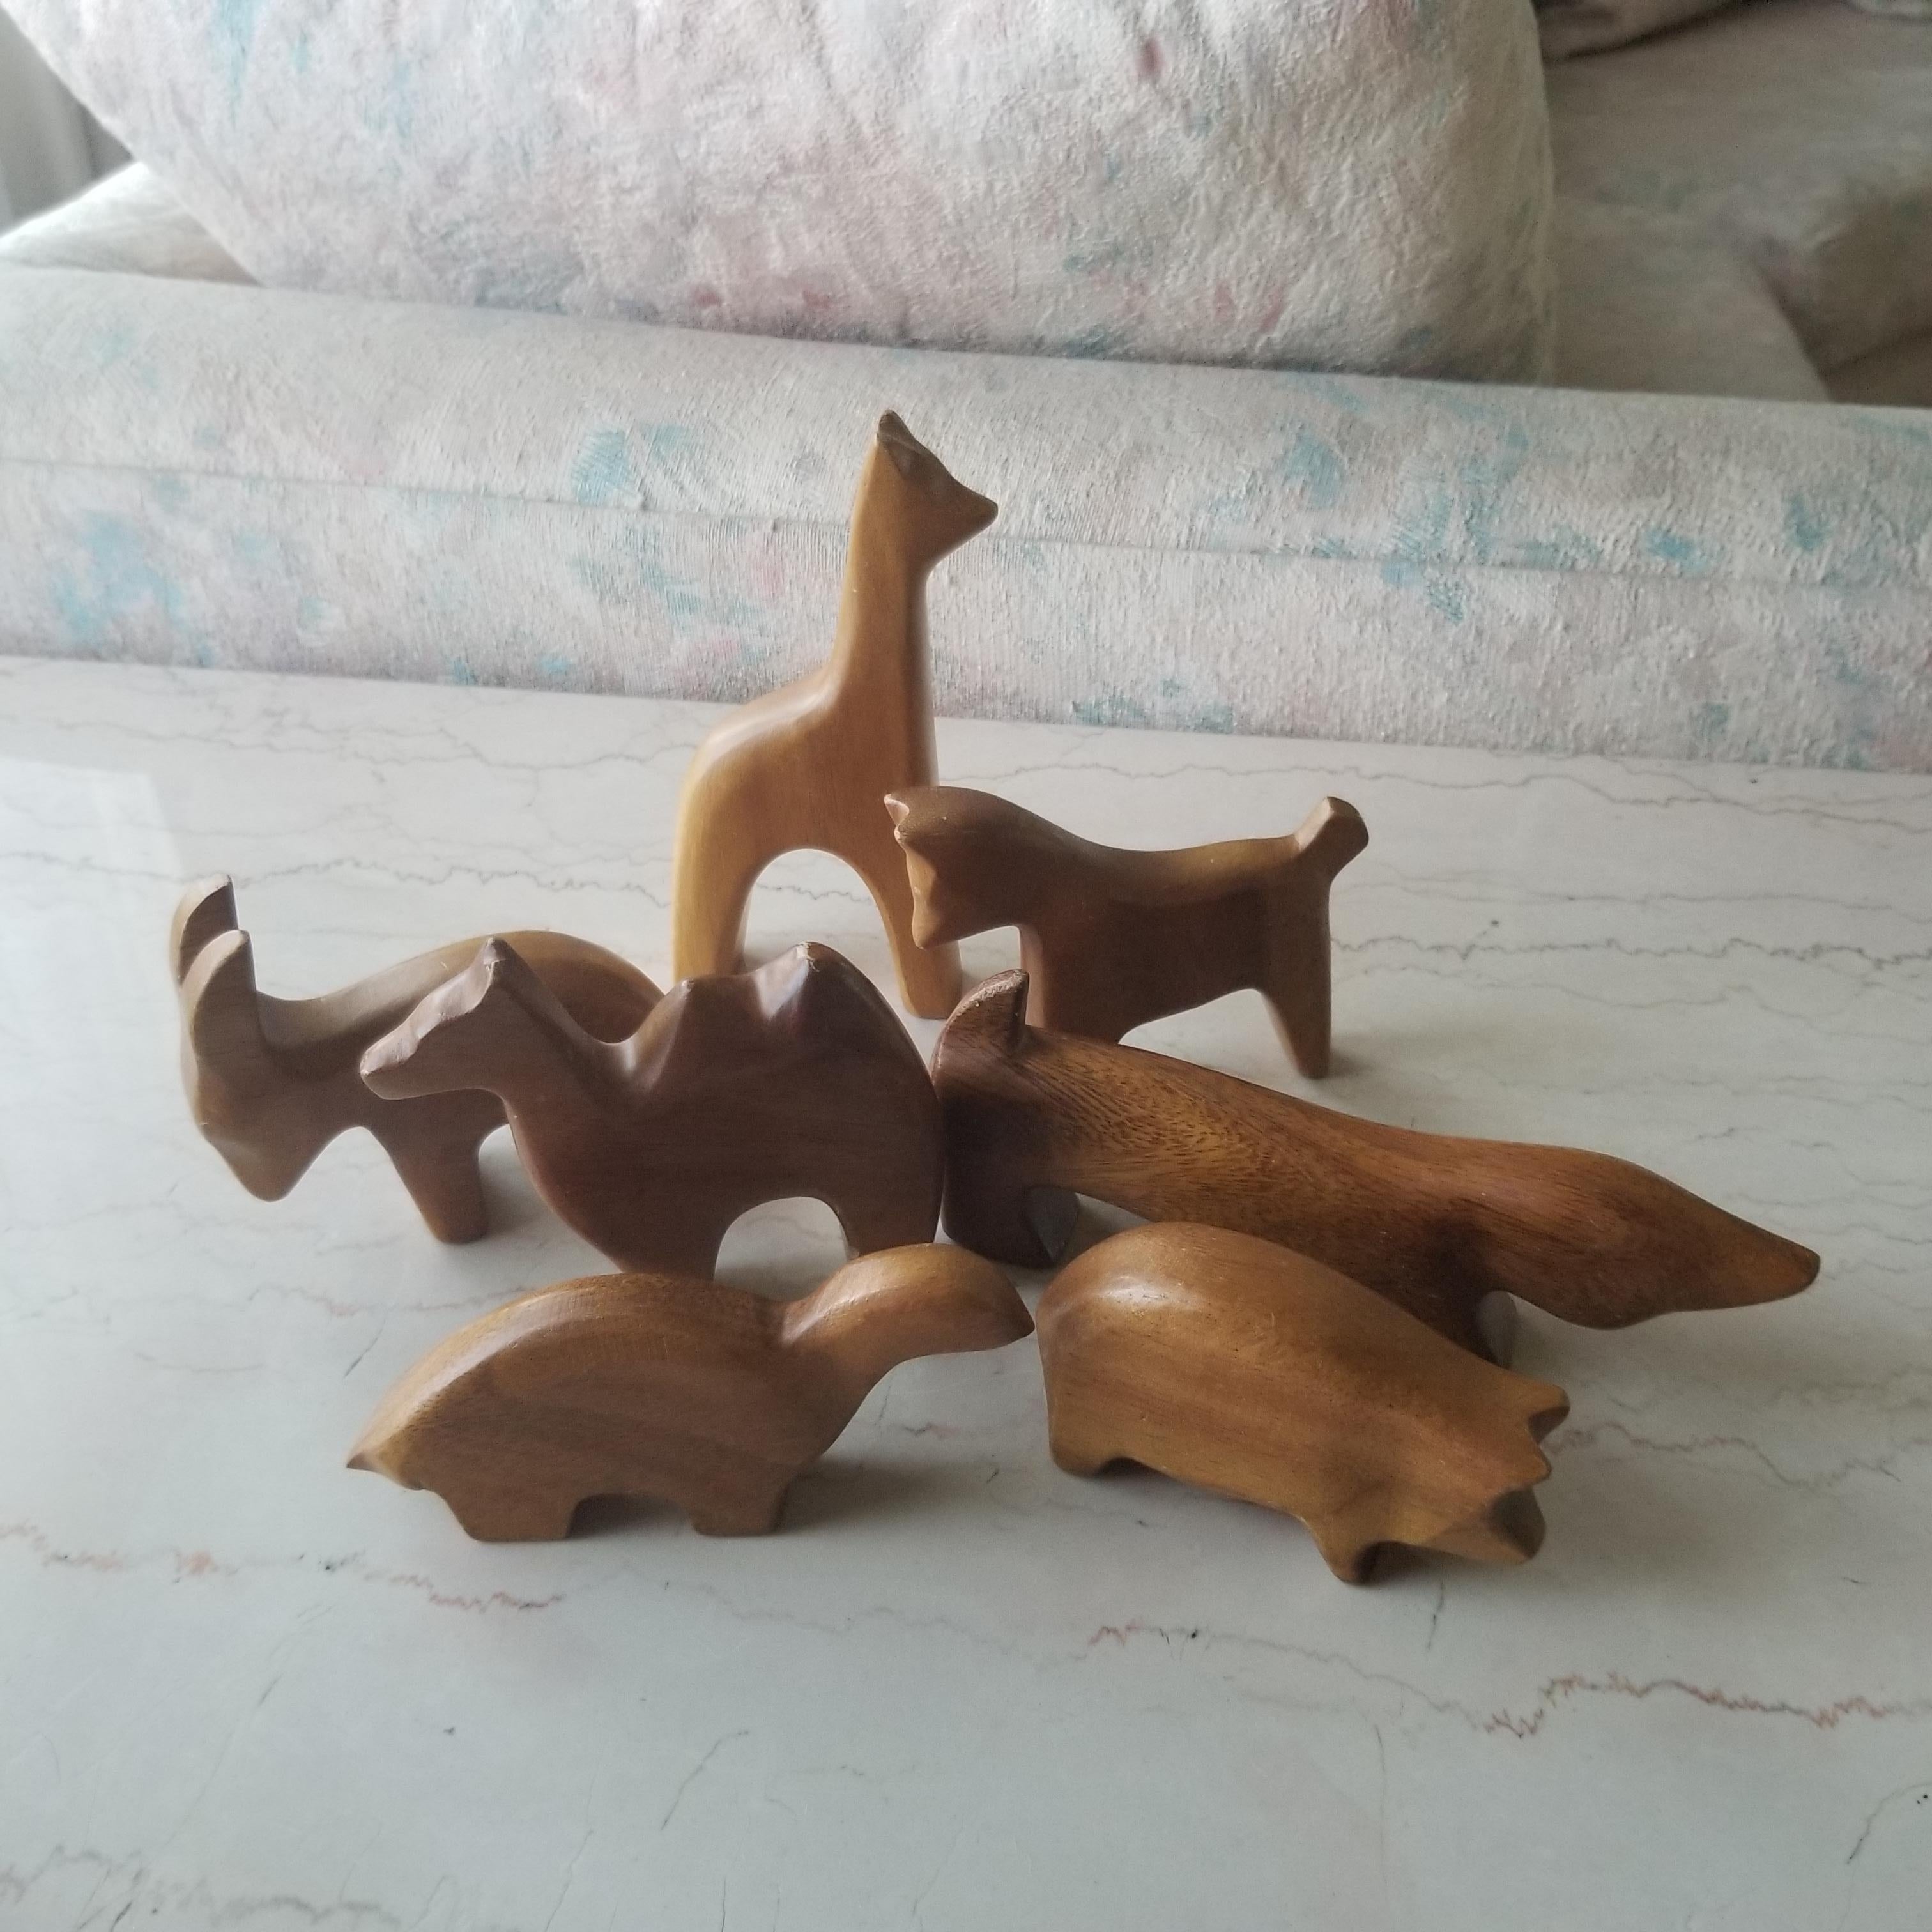 Scandinavian Mid-Century Modern wood animal collection set of seven pieces
Styled after designs of Arne Tjomsland
Includes Dog Giraffe Ibex Camel Pig Turtle Horse
Set includes seven carved wooden animals
Measurements assorted from 6.5 W x 5.5 T